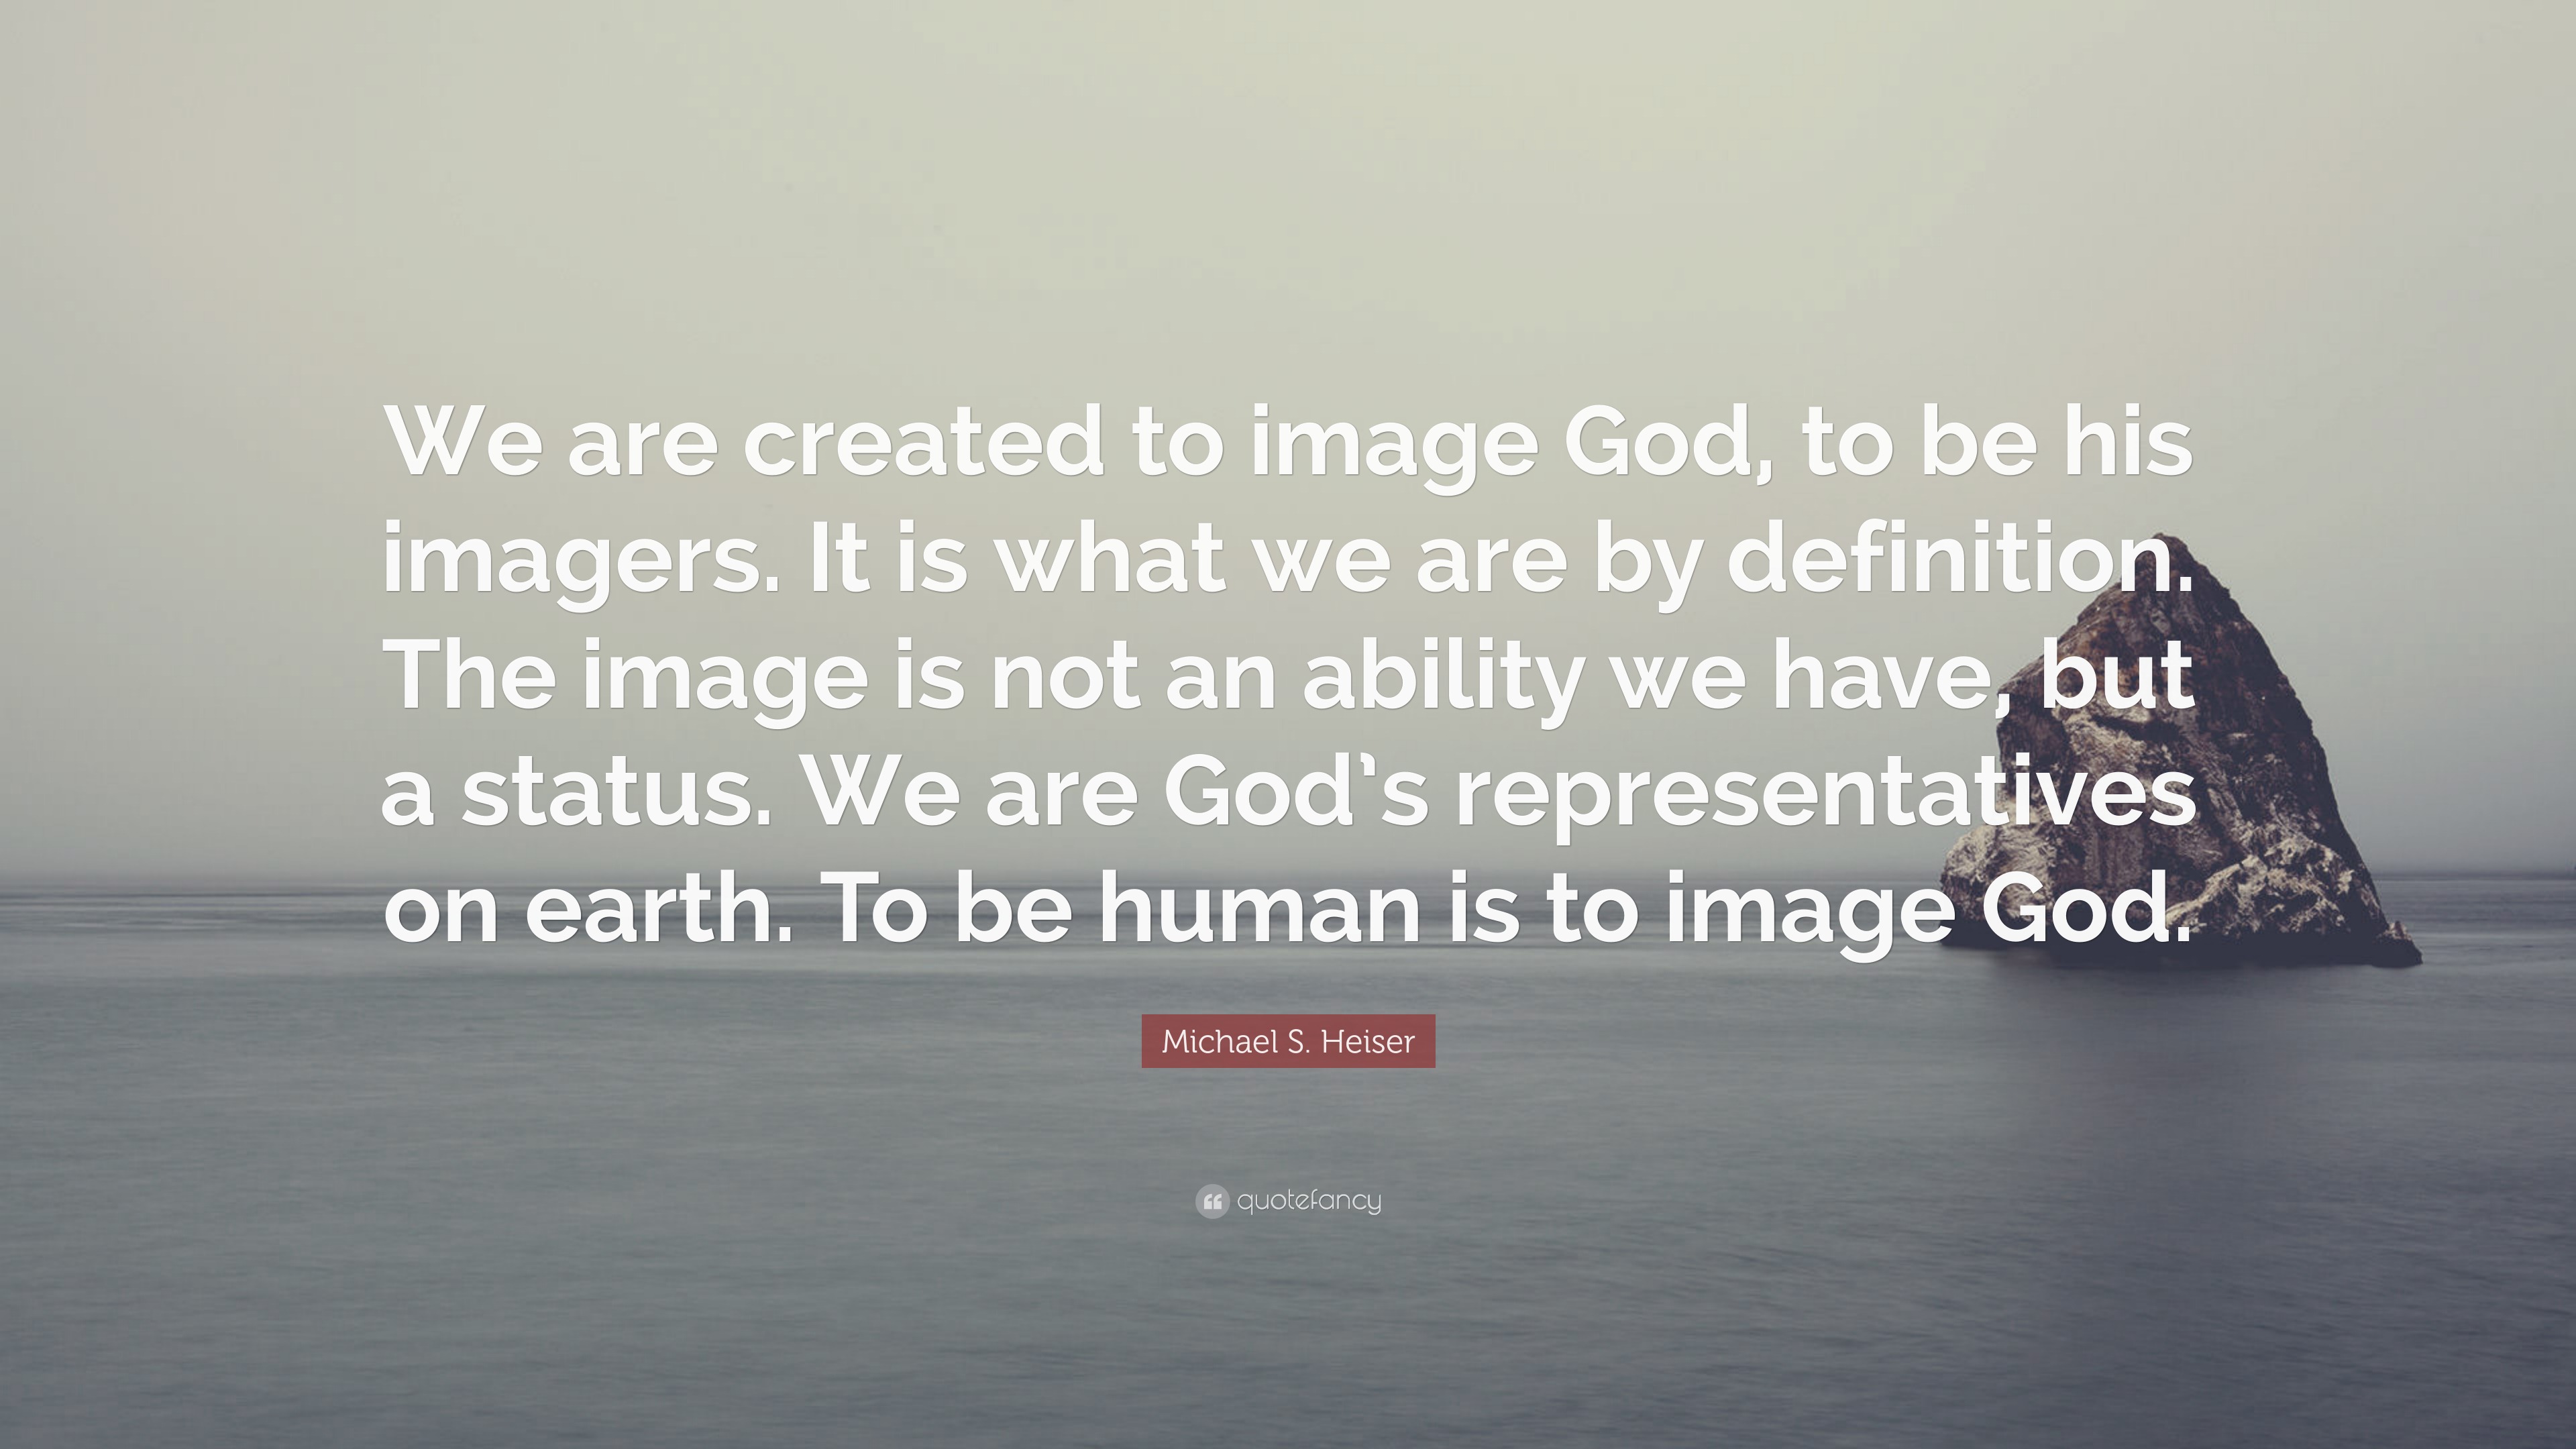 6447724-Michael-S-Heiser-Quote-We-are-created-to-image-God-to-be-his.jpg